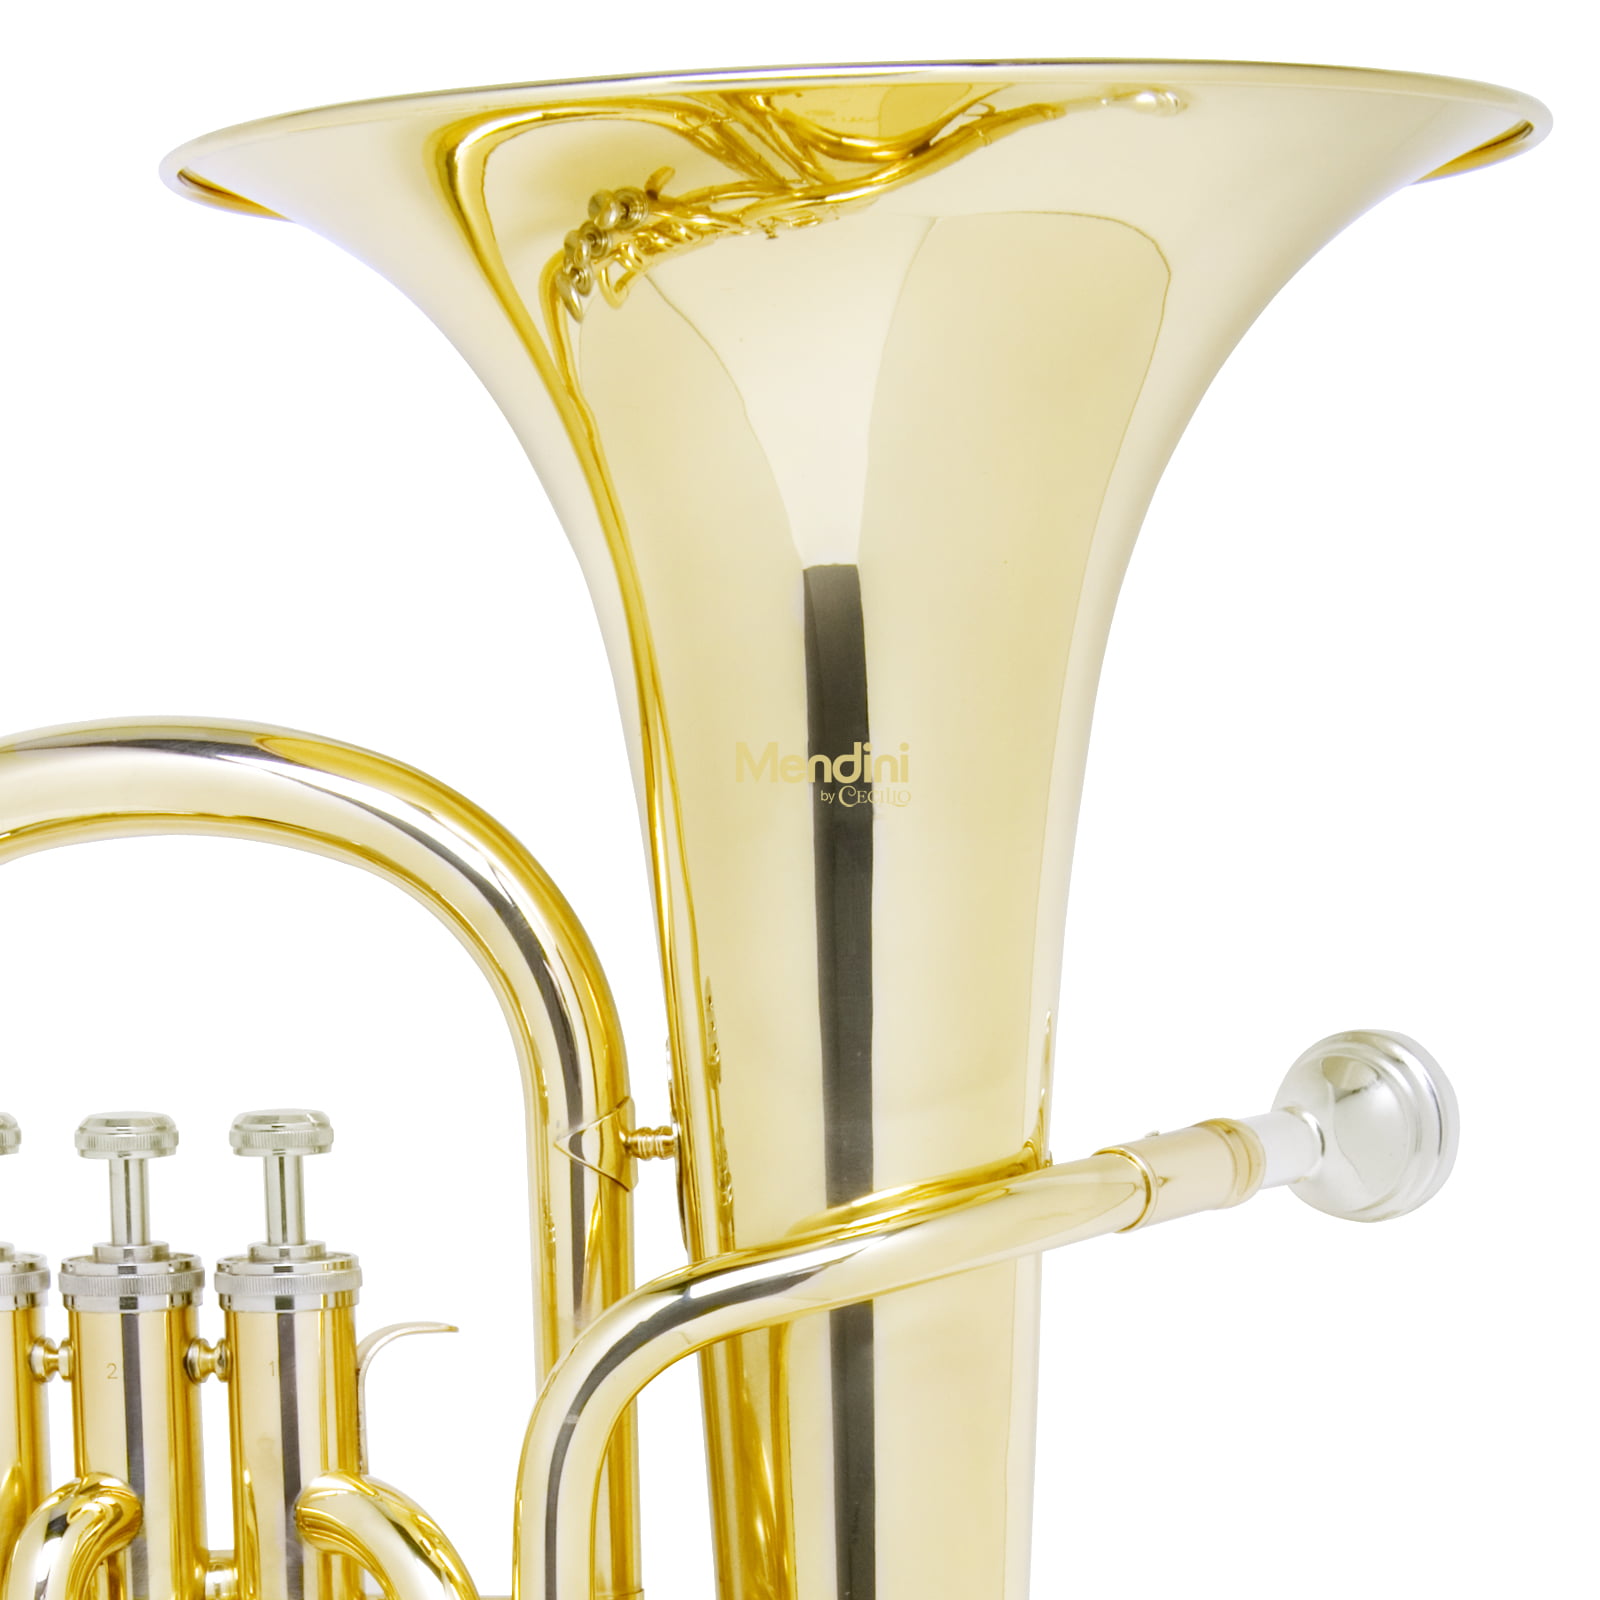 Mendini MBR-20 Lacquer Brass B Flat Baritone with Stainless Steel Pistons 